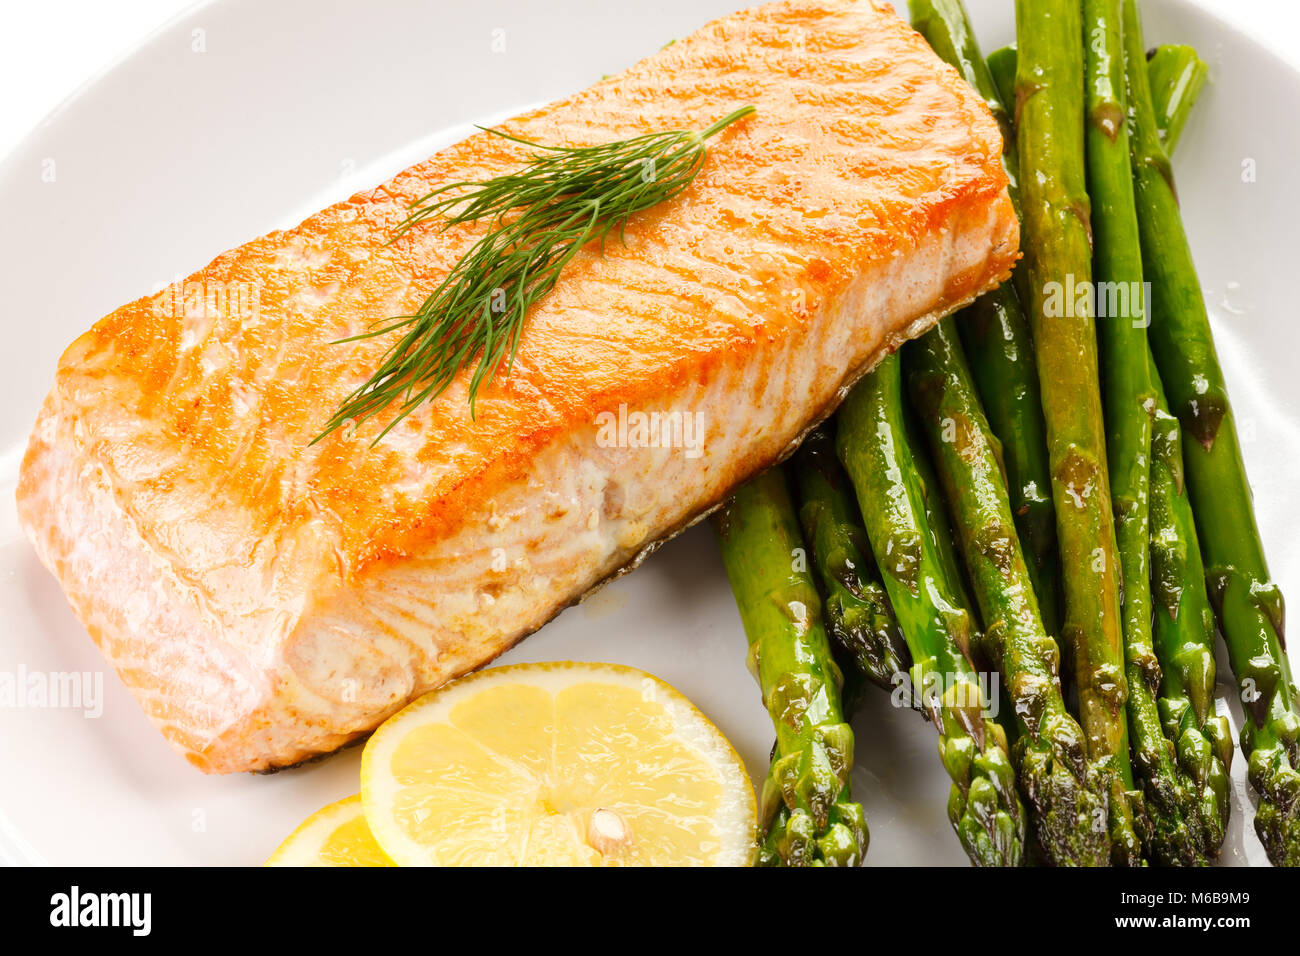 Grilled salmon and asparagus Stock Photo - Alamy